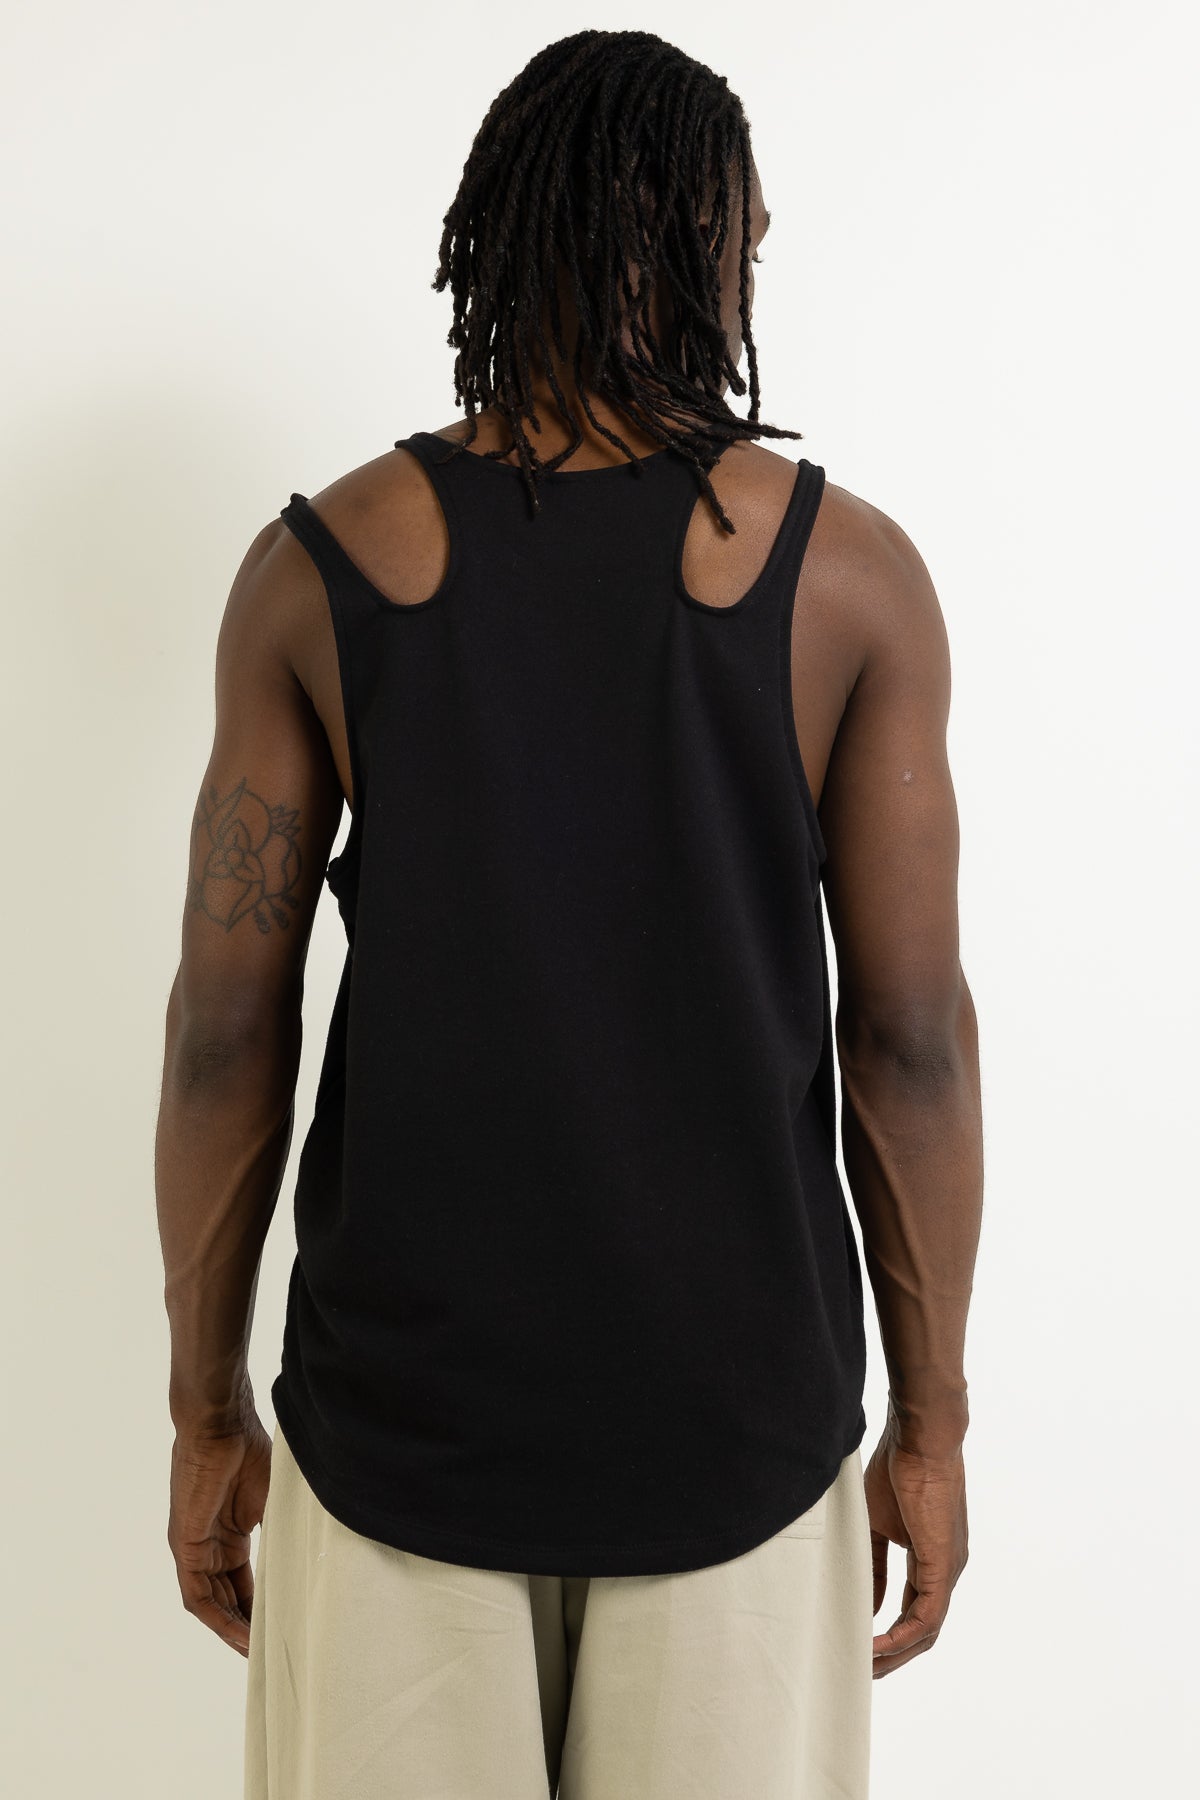 DYLAN CUTOUT TANK TOP - MERCY HOUSE